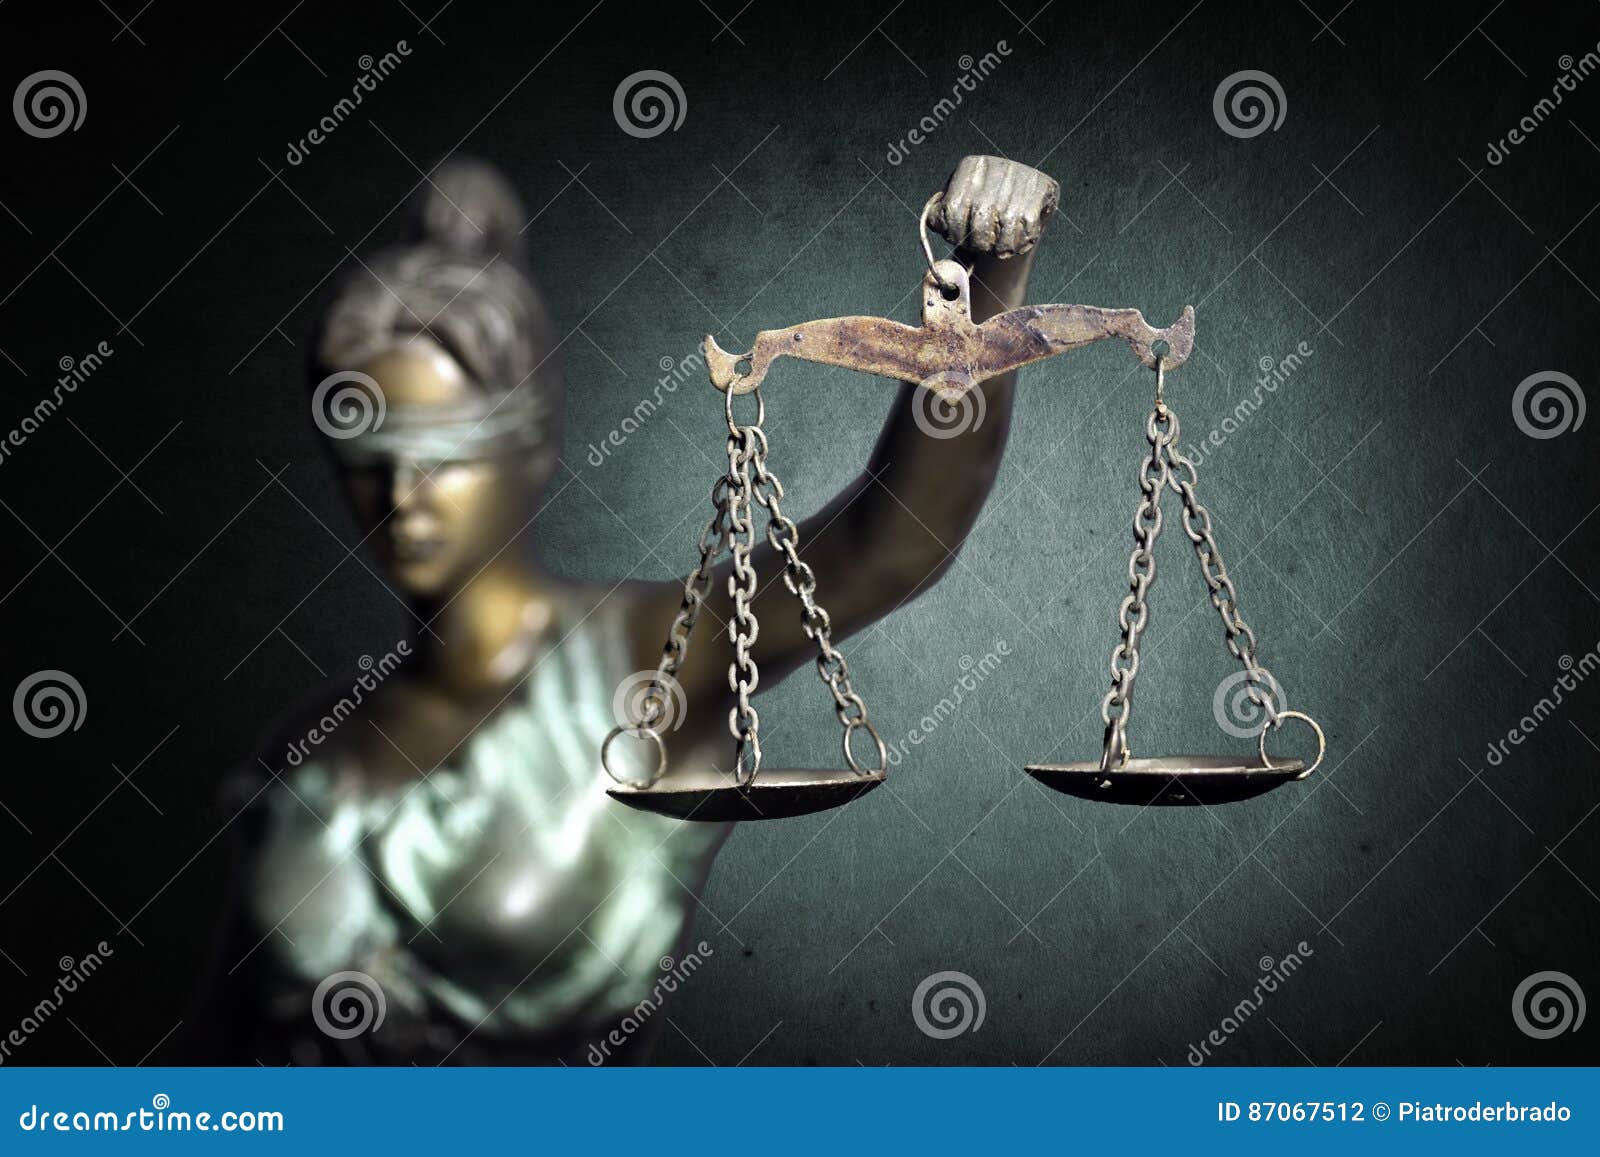 lady justice on emerald background